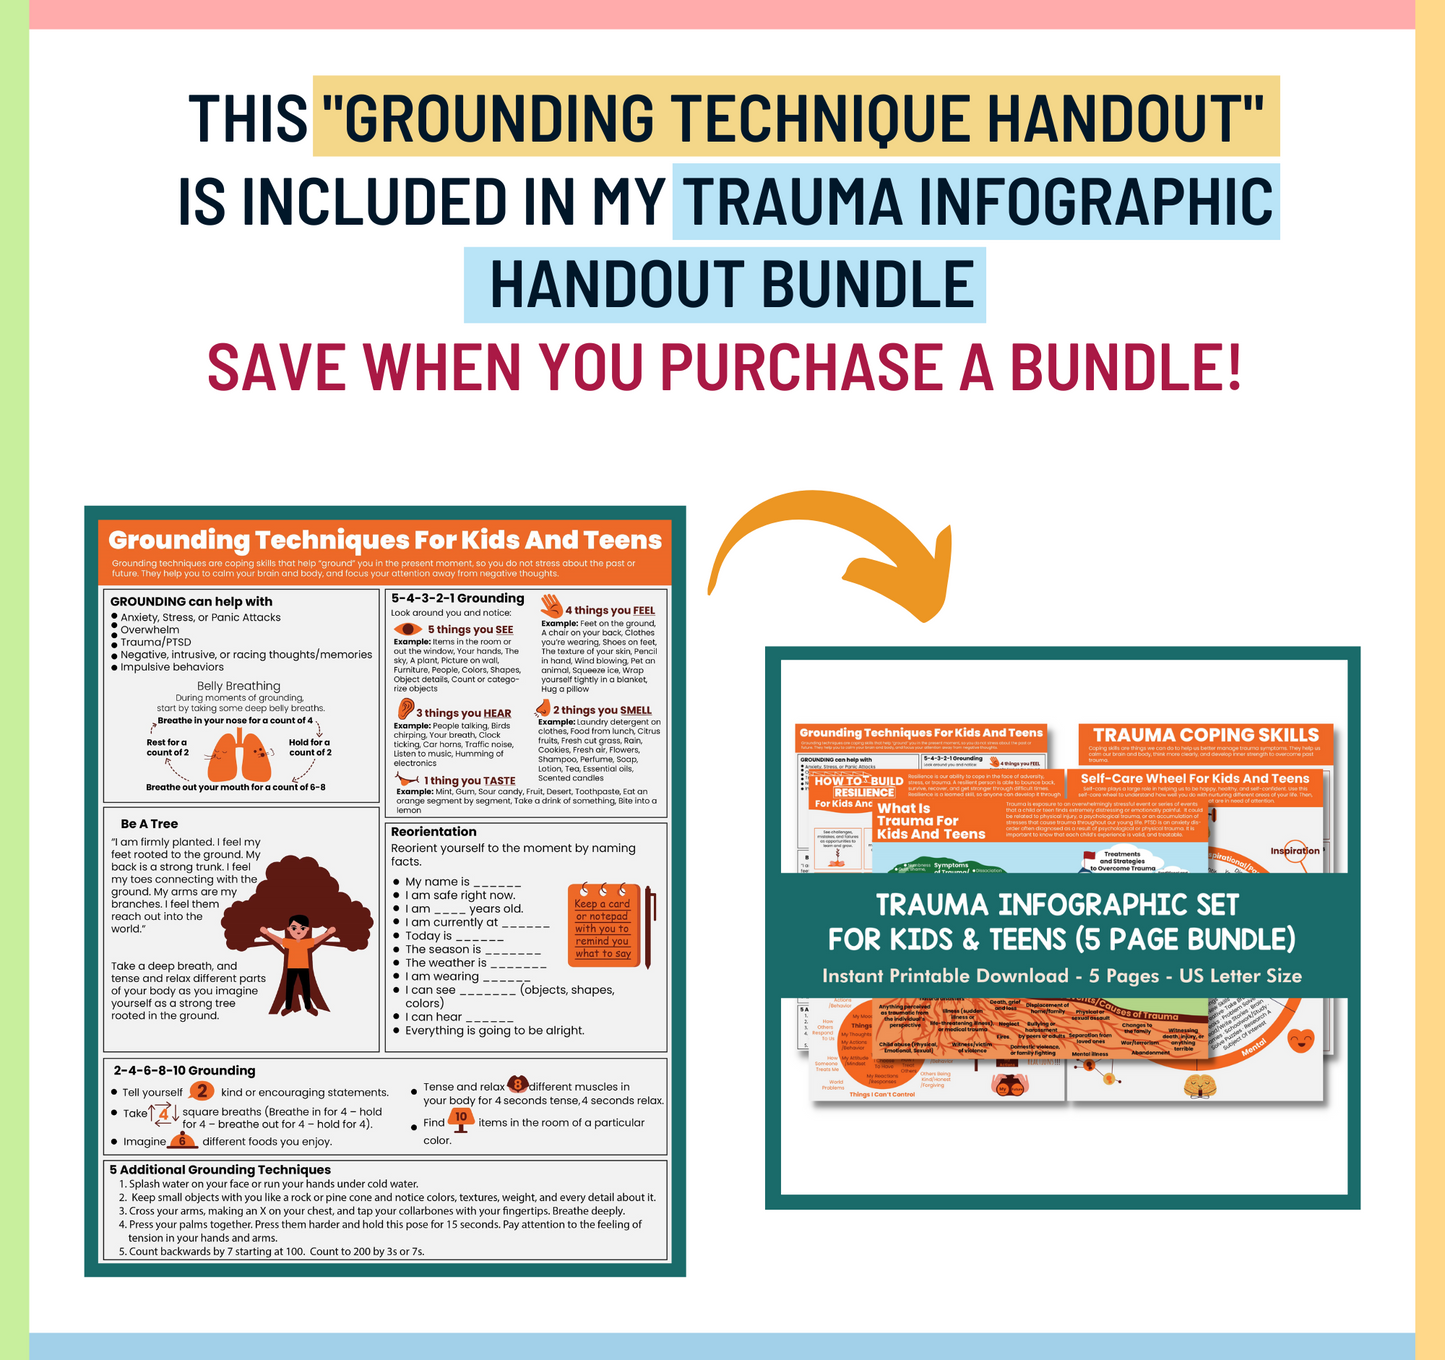 Grounding Techniques for Kids & Teens Printable Handout